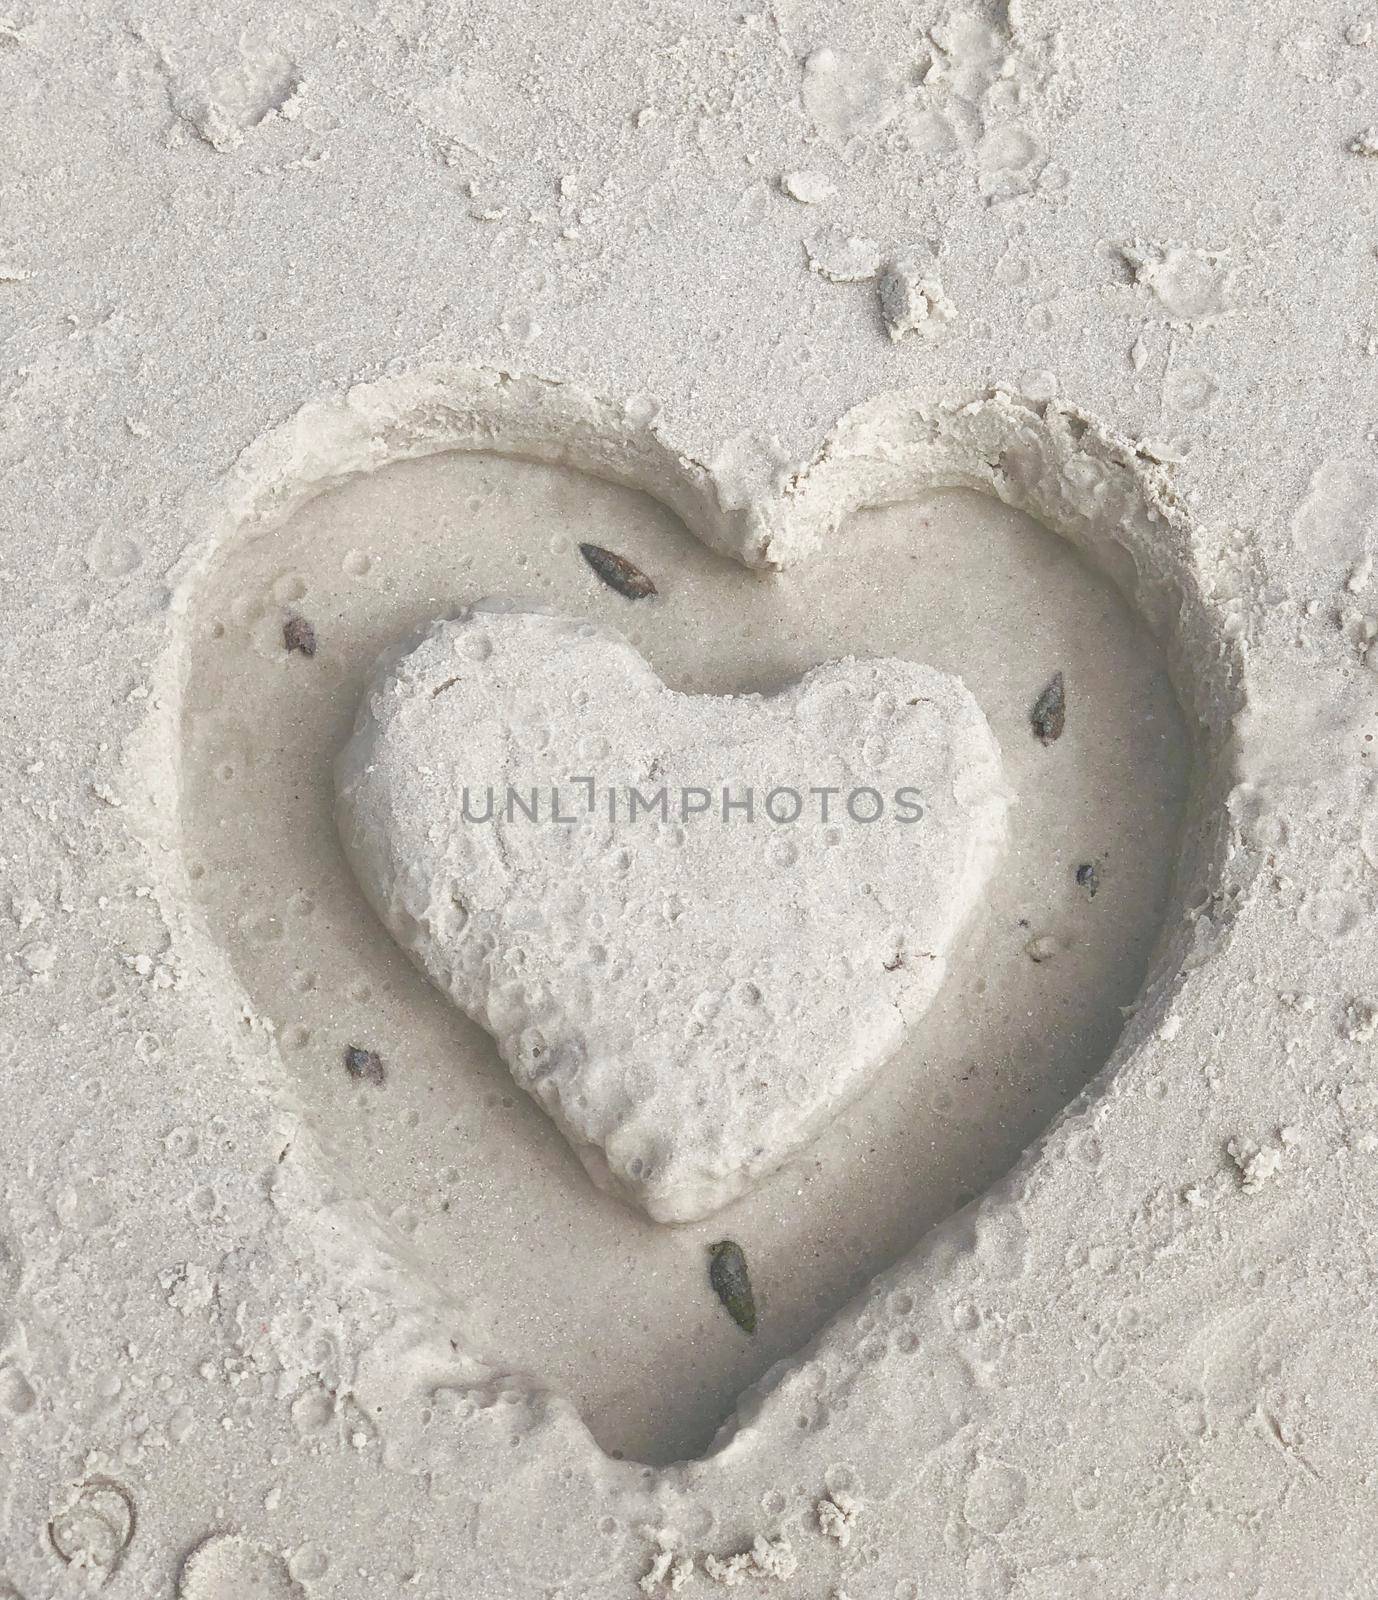 Top corner close-up of hand-drawn abstract heart on the beach, feeling, love concept. by noppha80